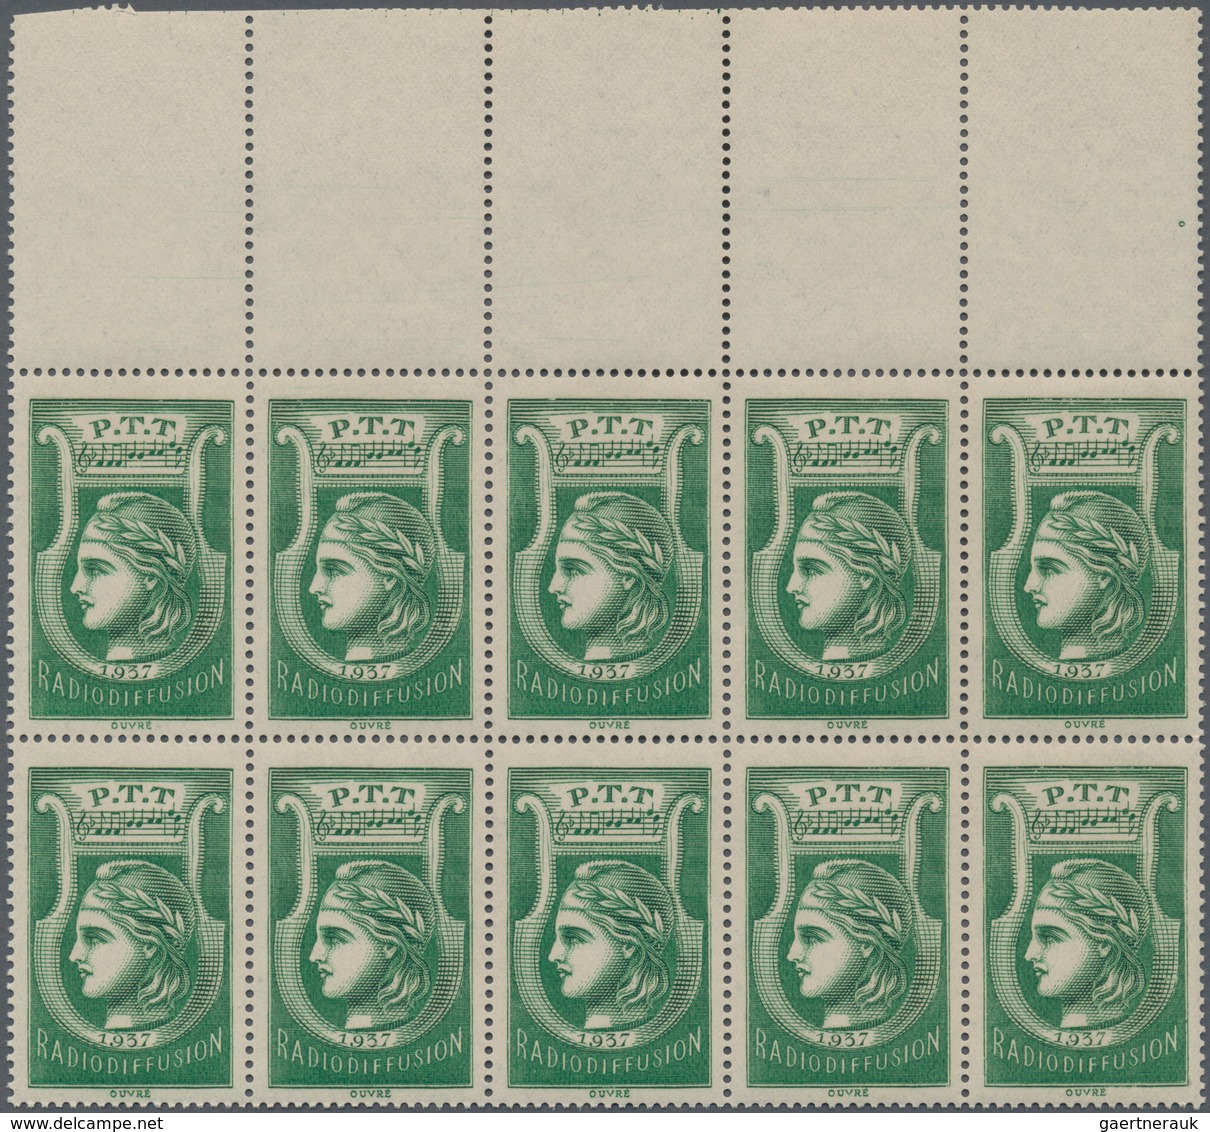 Frankreich - Portomarken: 1937, Radiodiffusion Stamp In Green, Lot Of 100 Stamps Within Multiples, M - 1960-.... Used